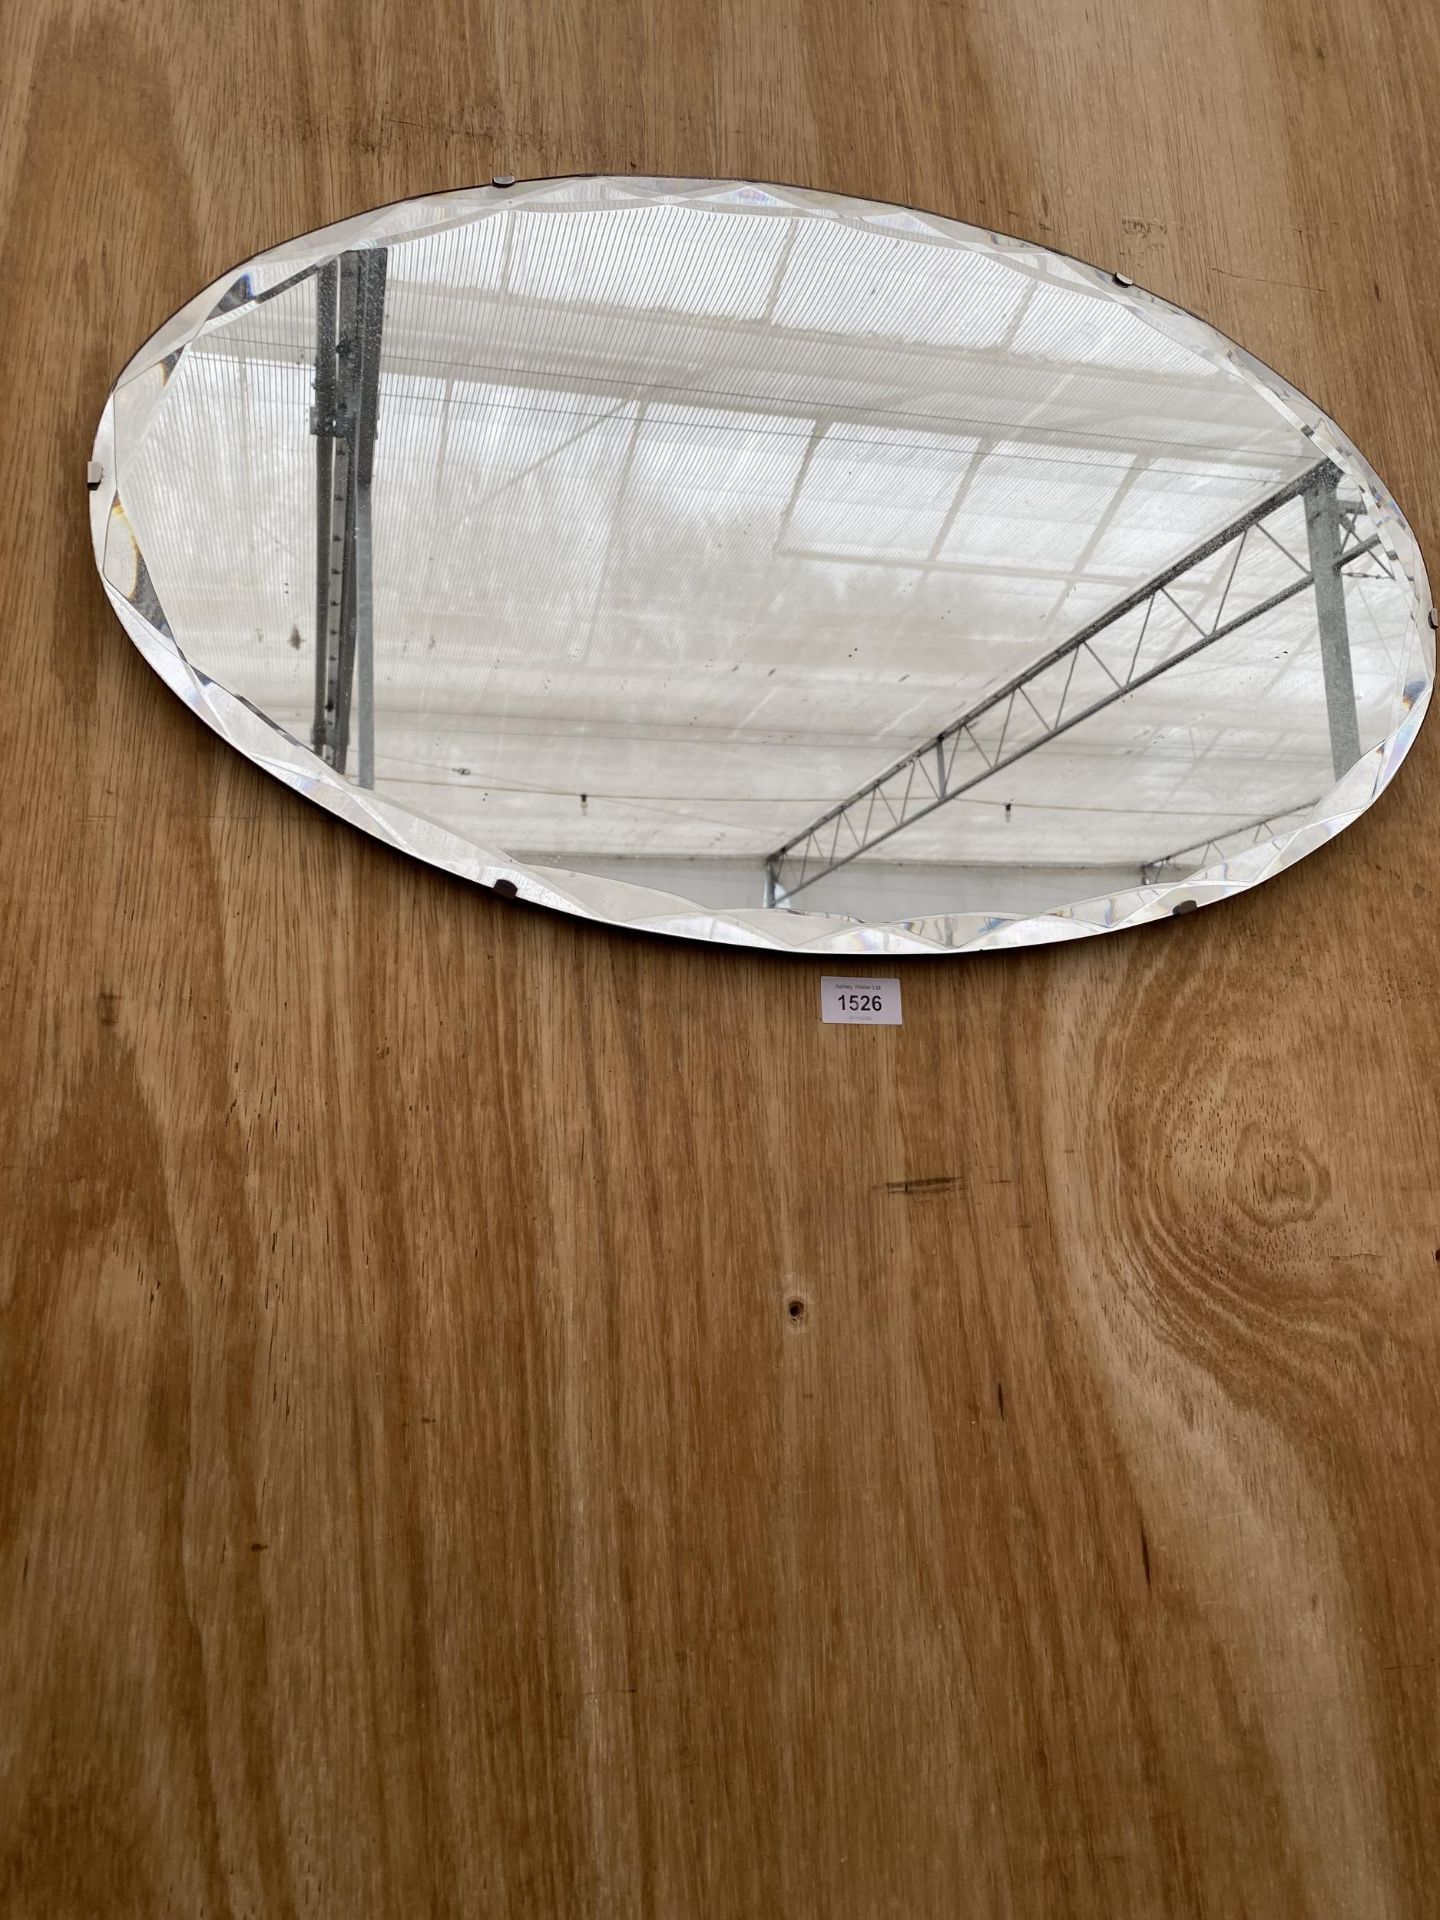 AN OVAL ART DECO UNFRAMED BEVELED EDGE WALL MIRROR WITH HANGING CHAIN